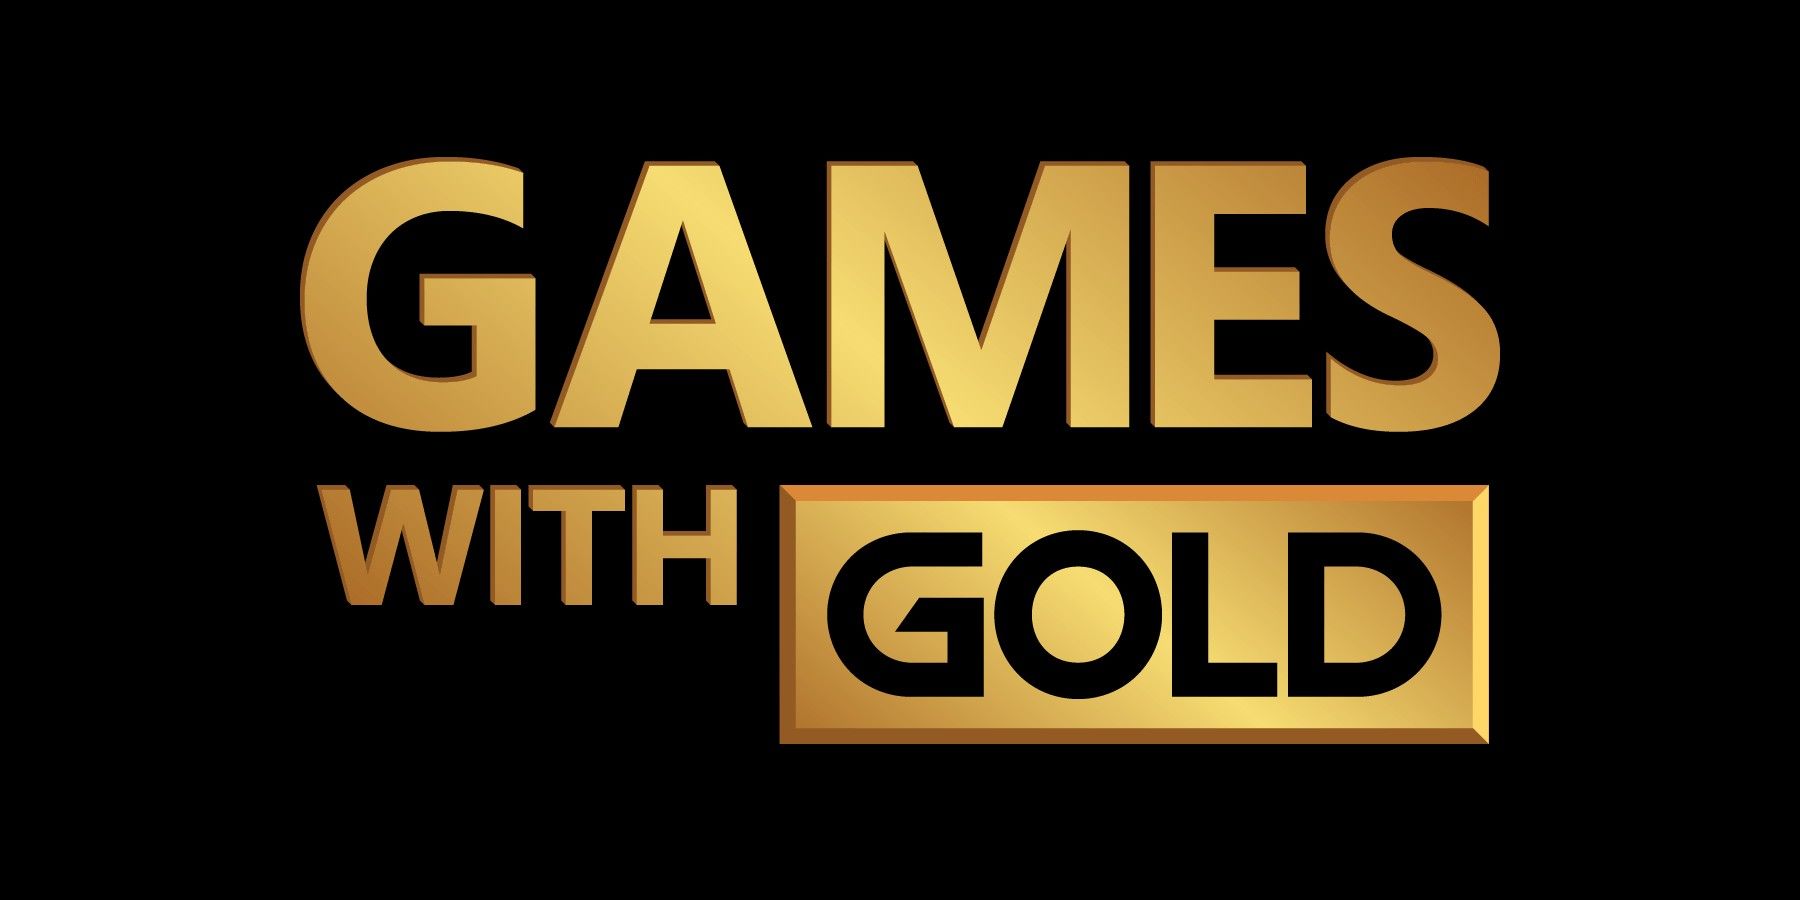 xbox games with gold logo black background